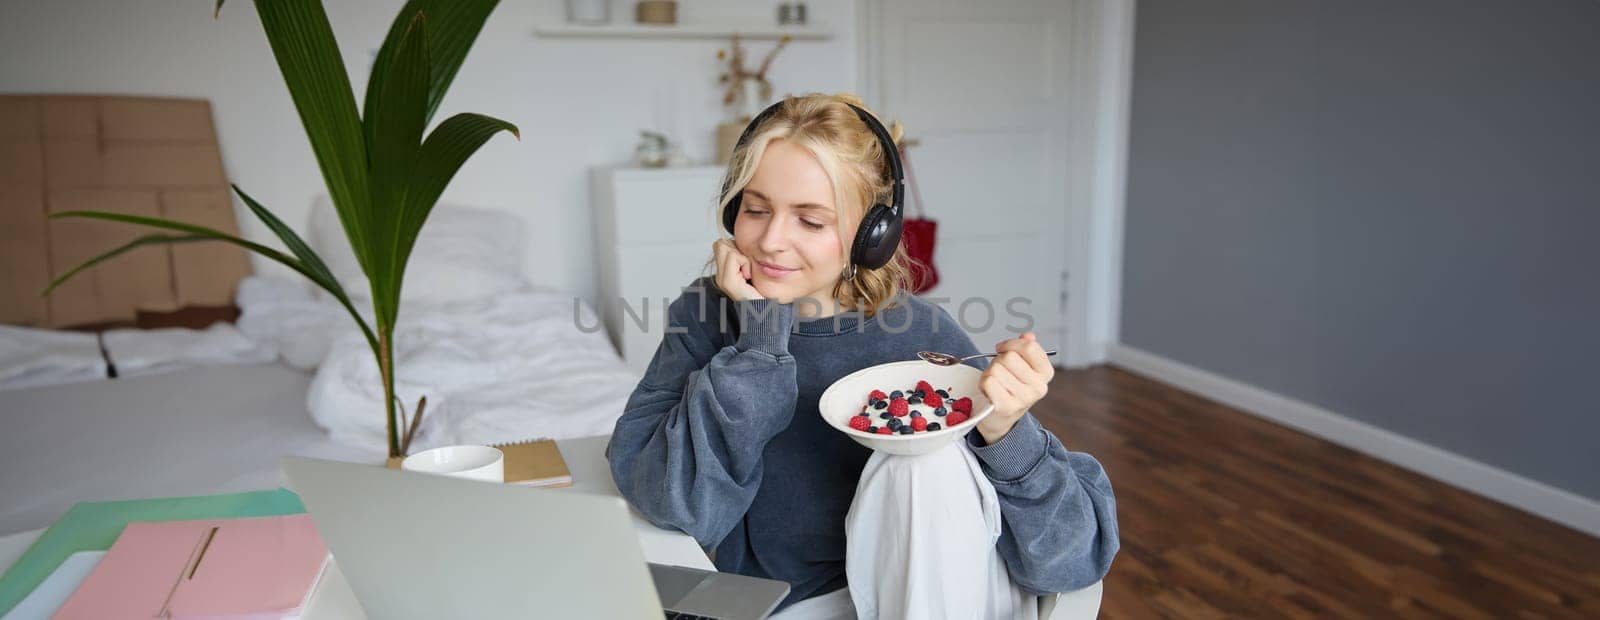 Image of happy woman sitting in a room, watching interesting tv show or movie on laptop, using screaming service, wearing headphones, eating dessert and drinking tea.